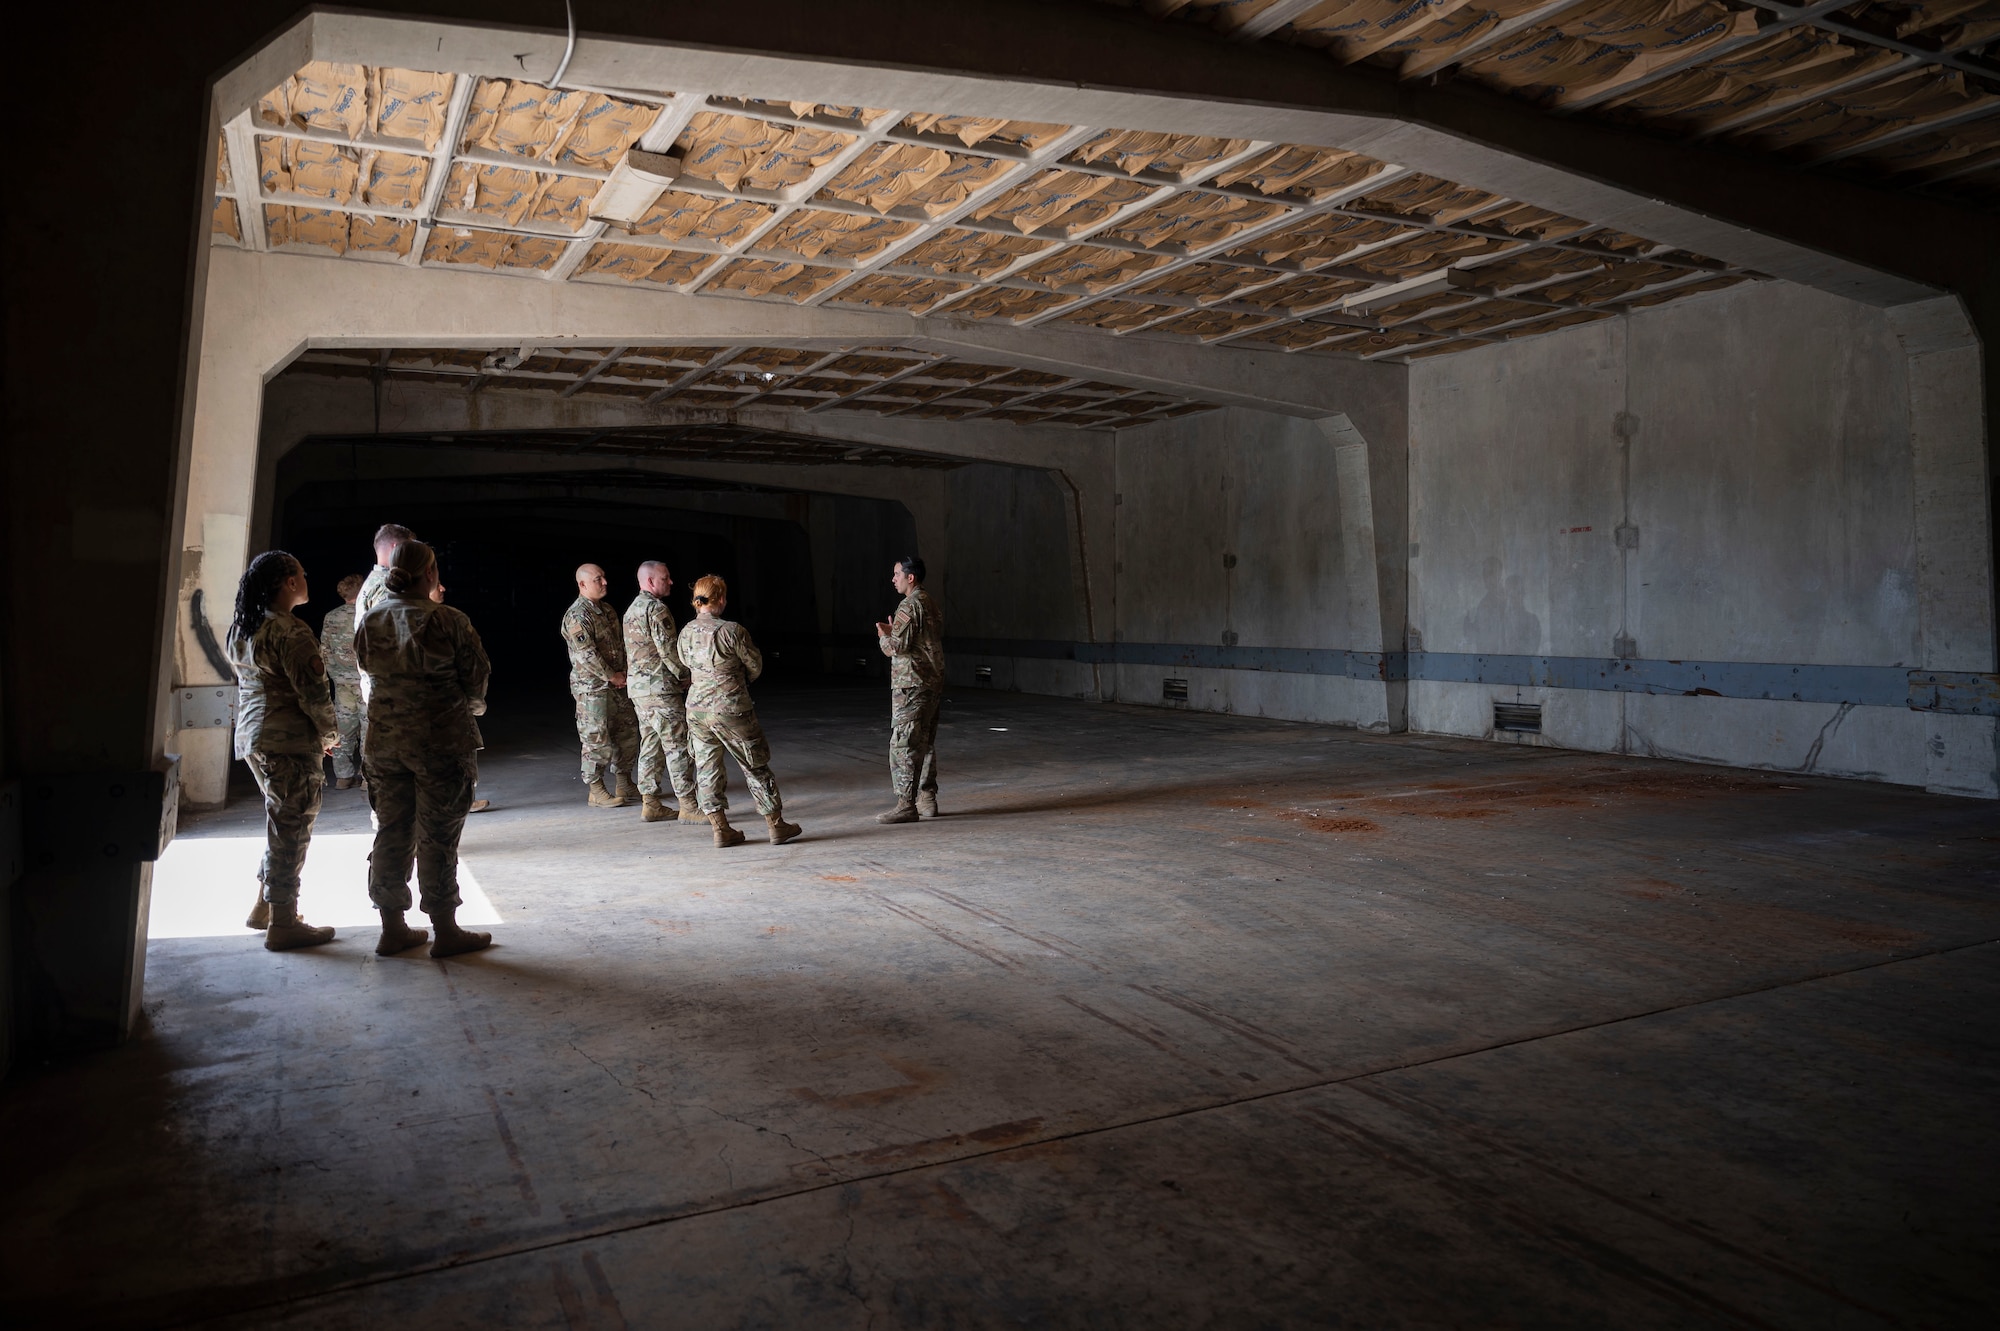 U.S. Air Force Chief Master Sgt. David R. Wolfe, Pacific Air Forces command chief, is briefed by Airmen with the 36th Munitions Squadron as they show him one of many munitions storage buildings at Andersen Air force Base, Guam, April 14, 2022.